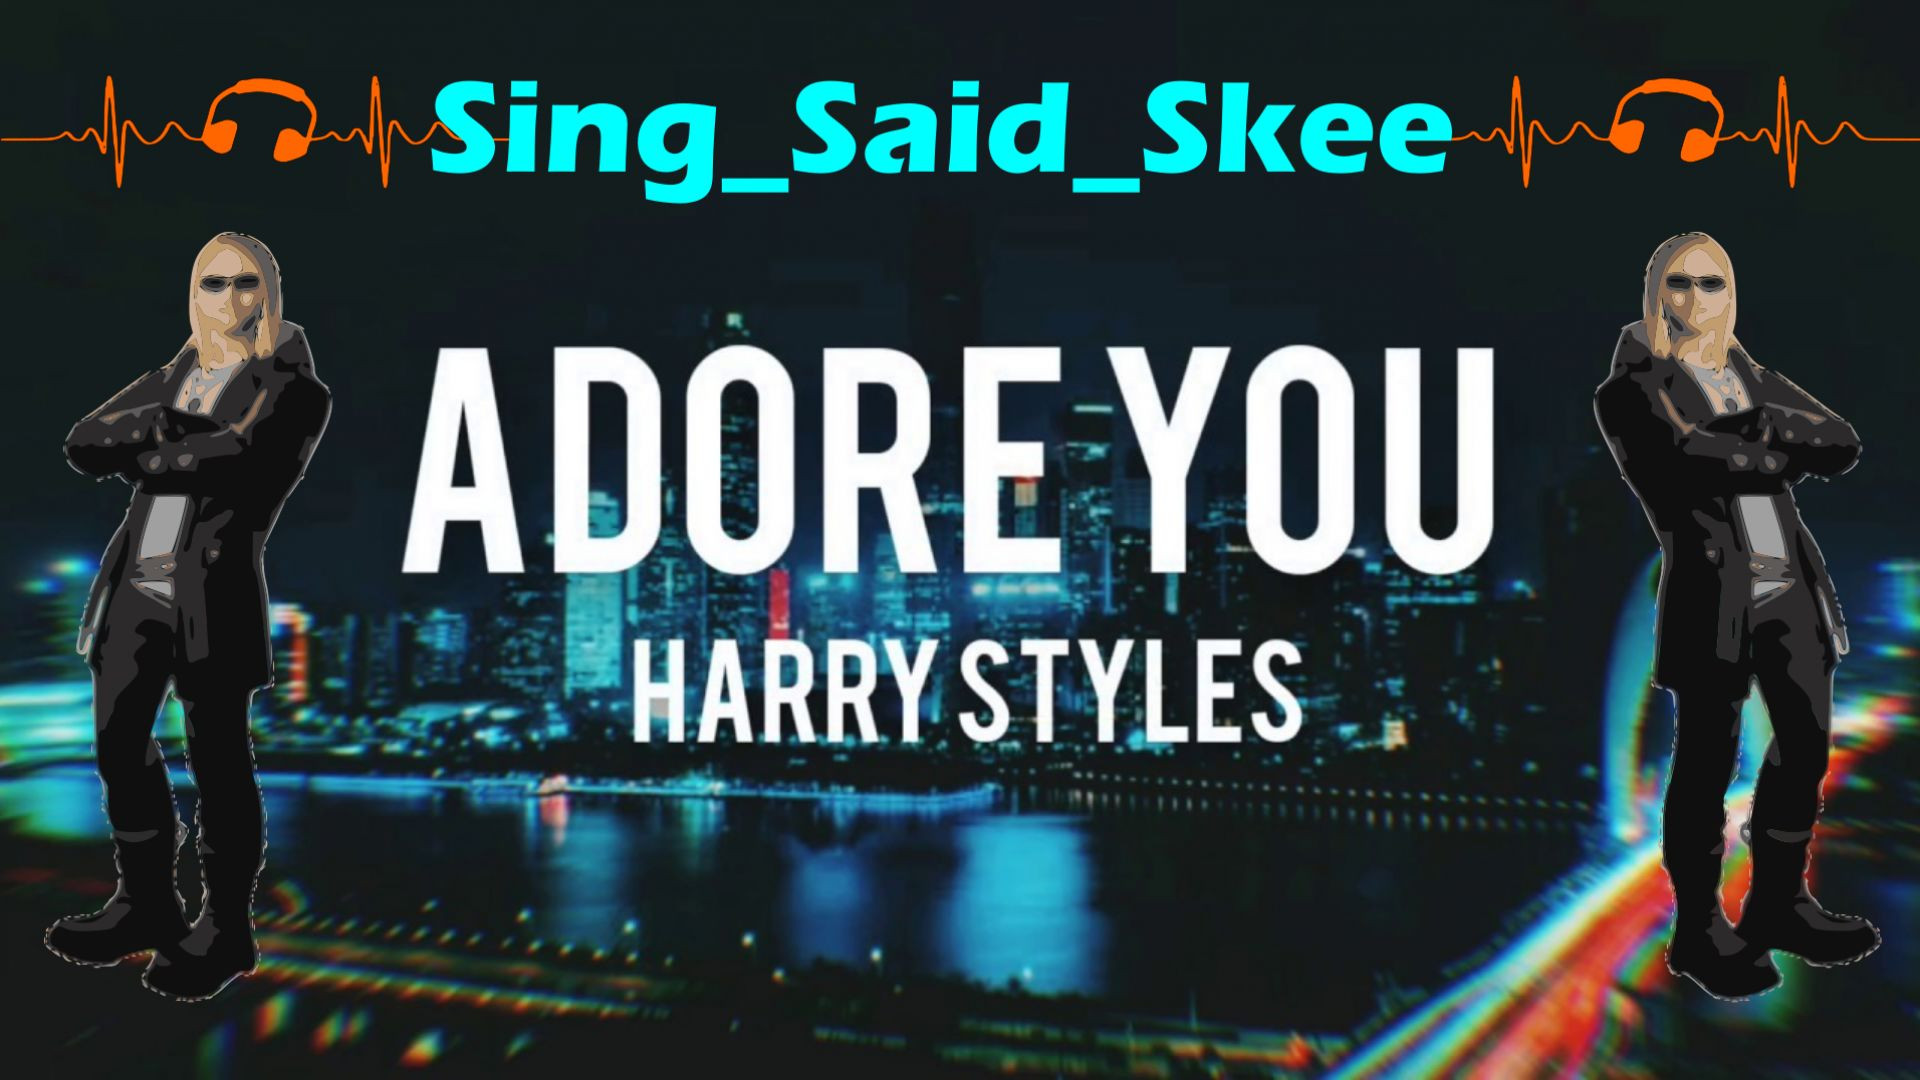 Adore You - Harry Styles - Sing_Said_Skee